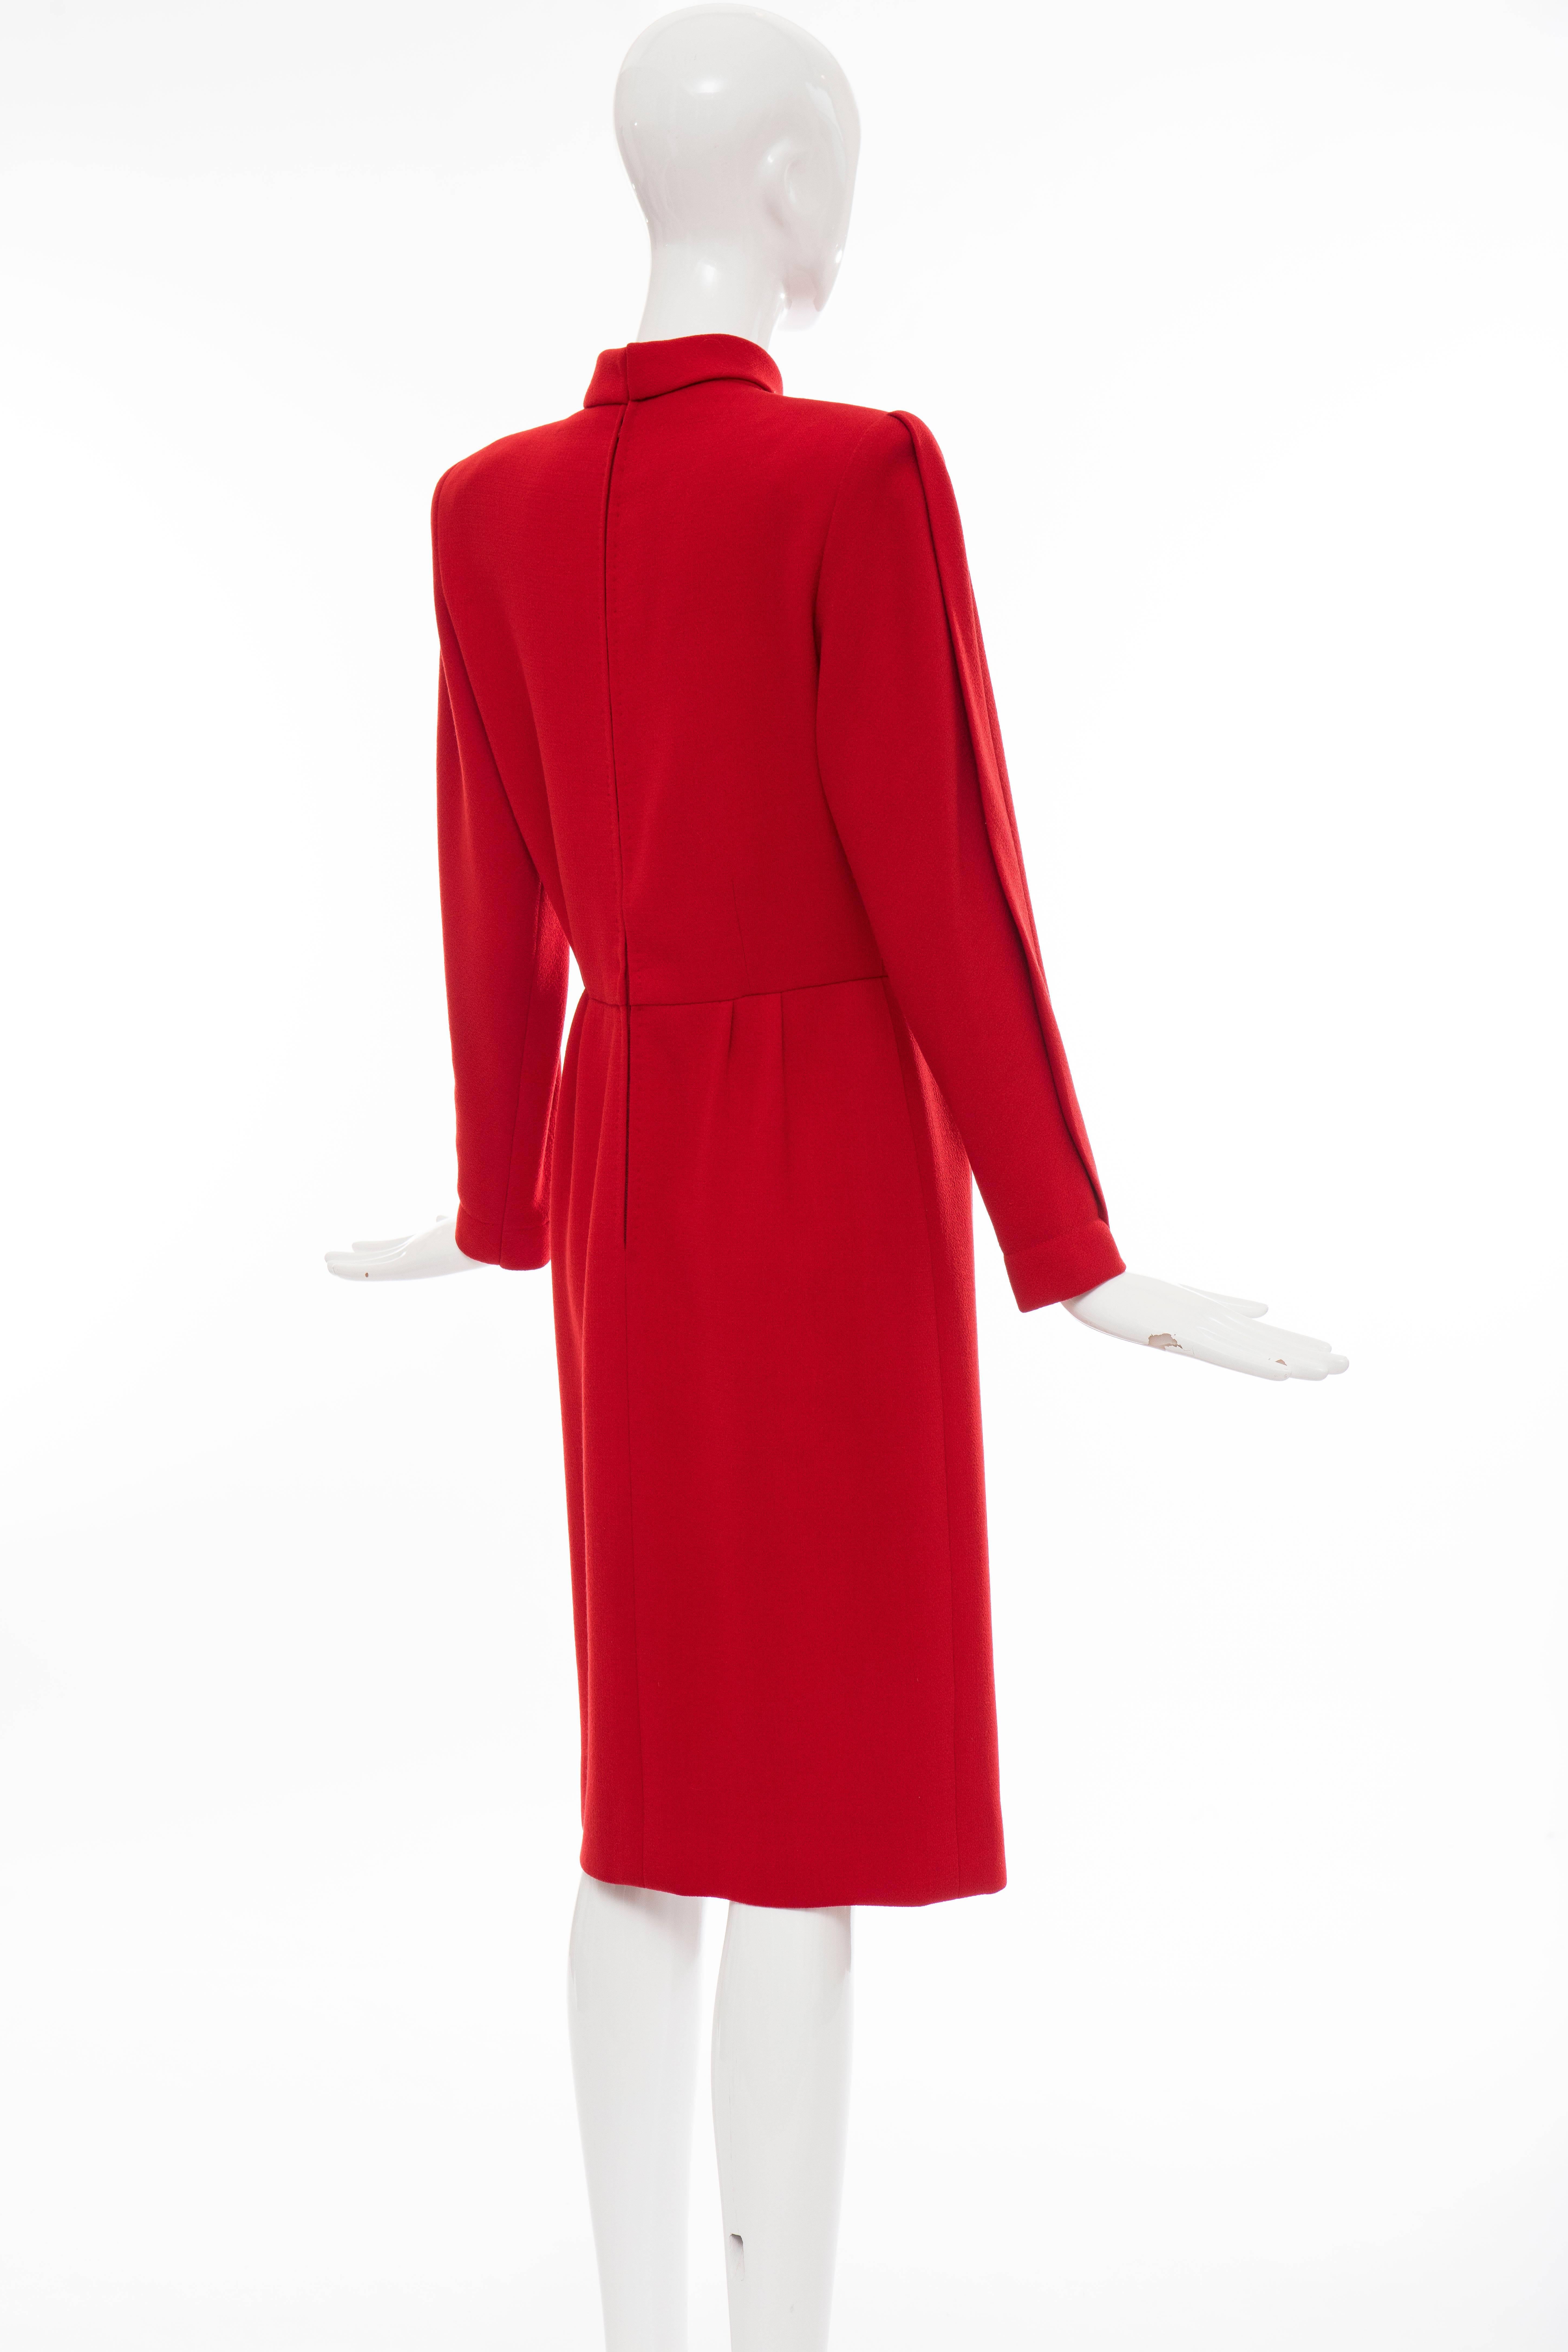 Nina Ricci Haute Couture Red Wool Crepe Dress, Circa 1980's For Sale 1